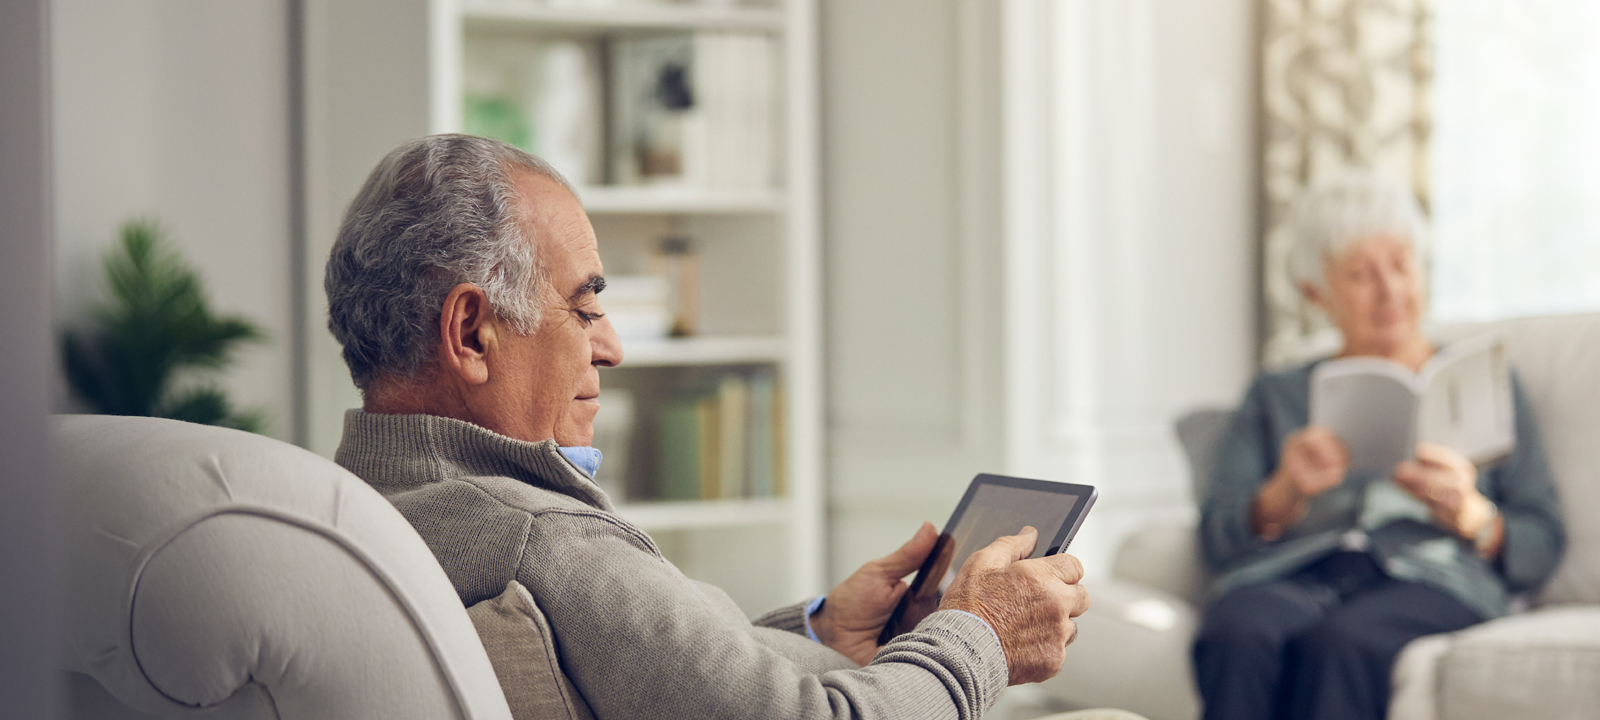 Male resident sitting in a comfortable chair using a tablet